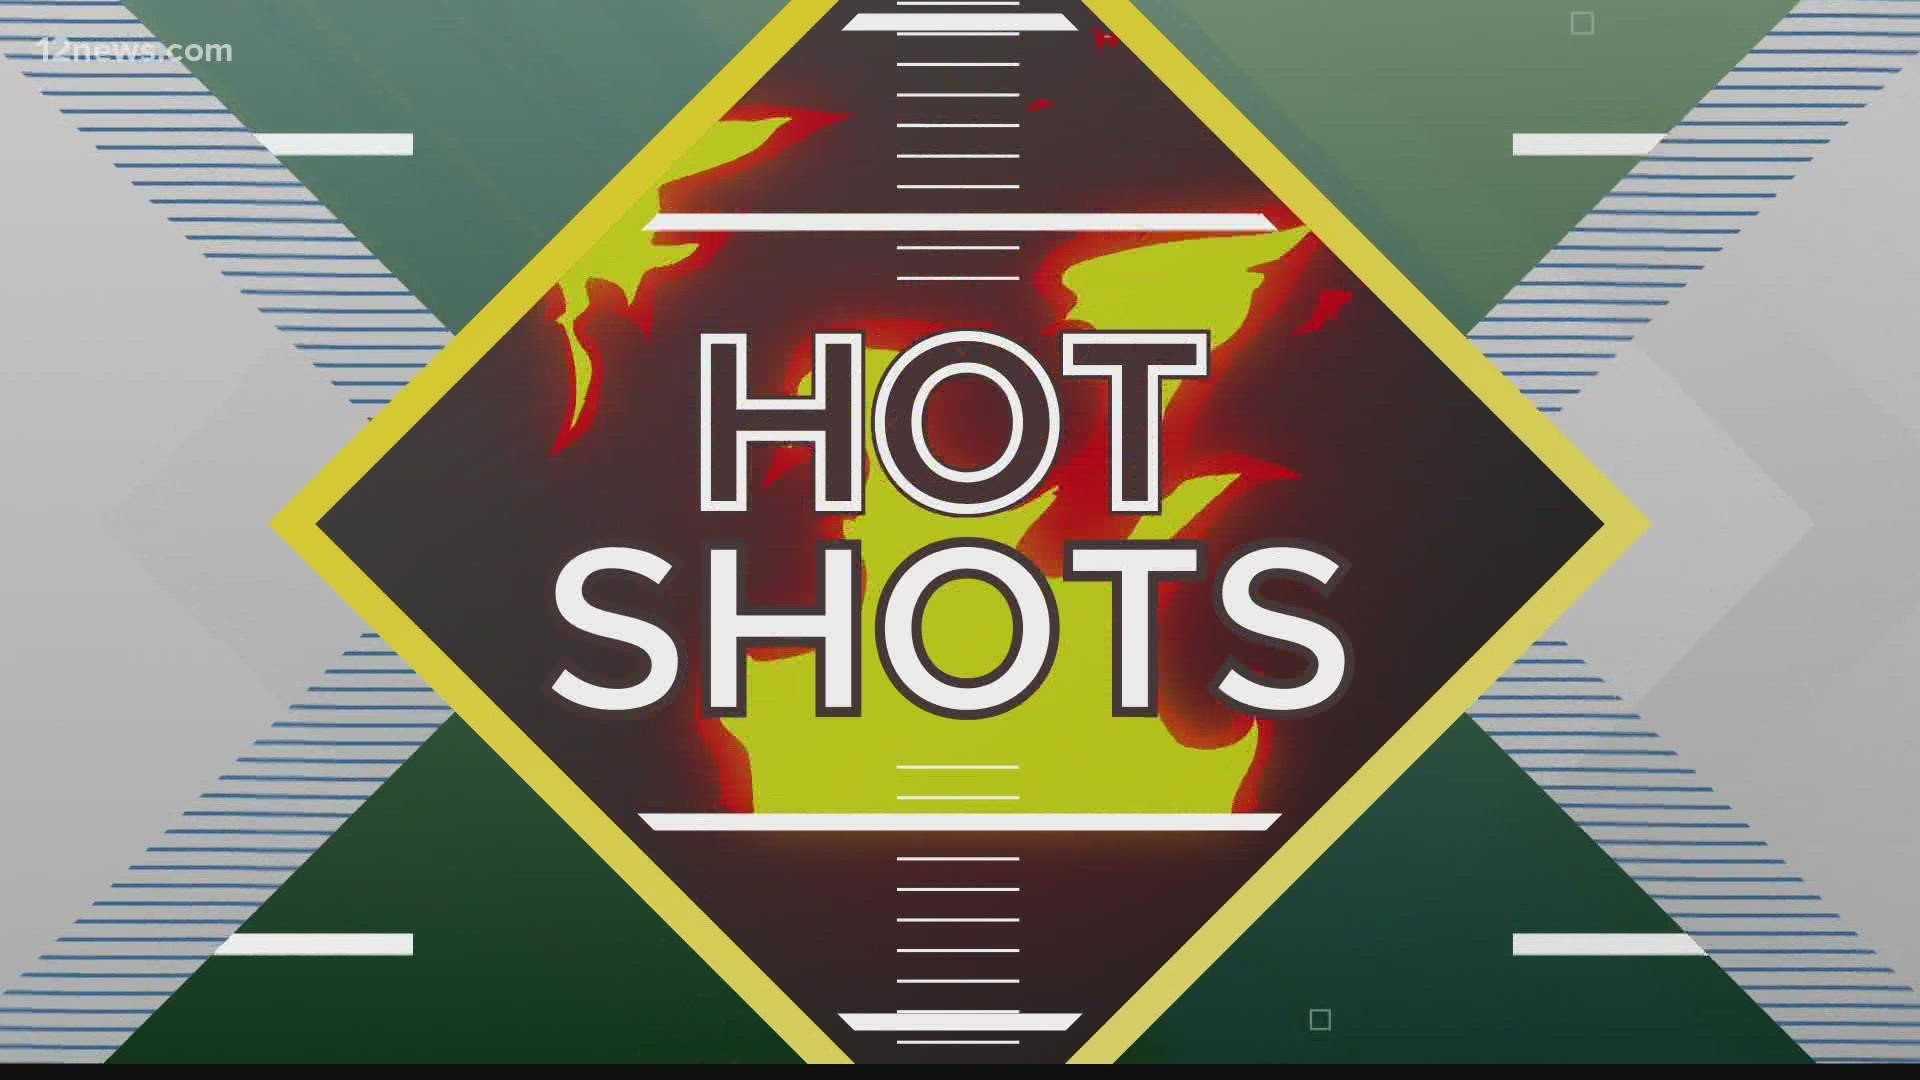 Go to 12news.com/fever to vote for one of these plays to be the Hot Shots Play of the Week!